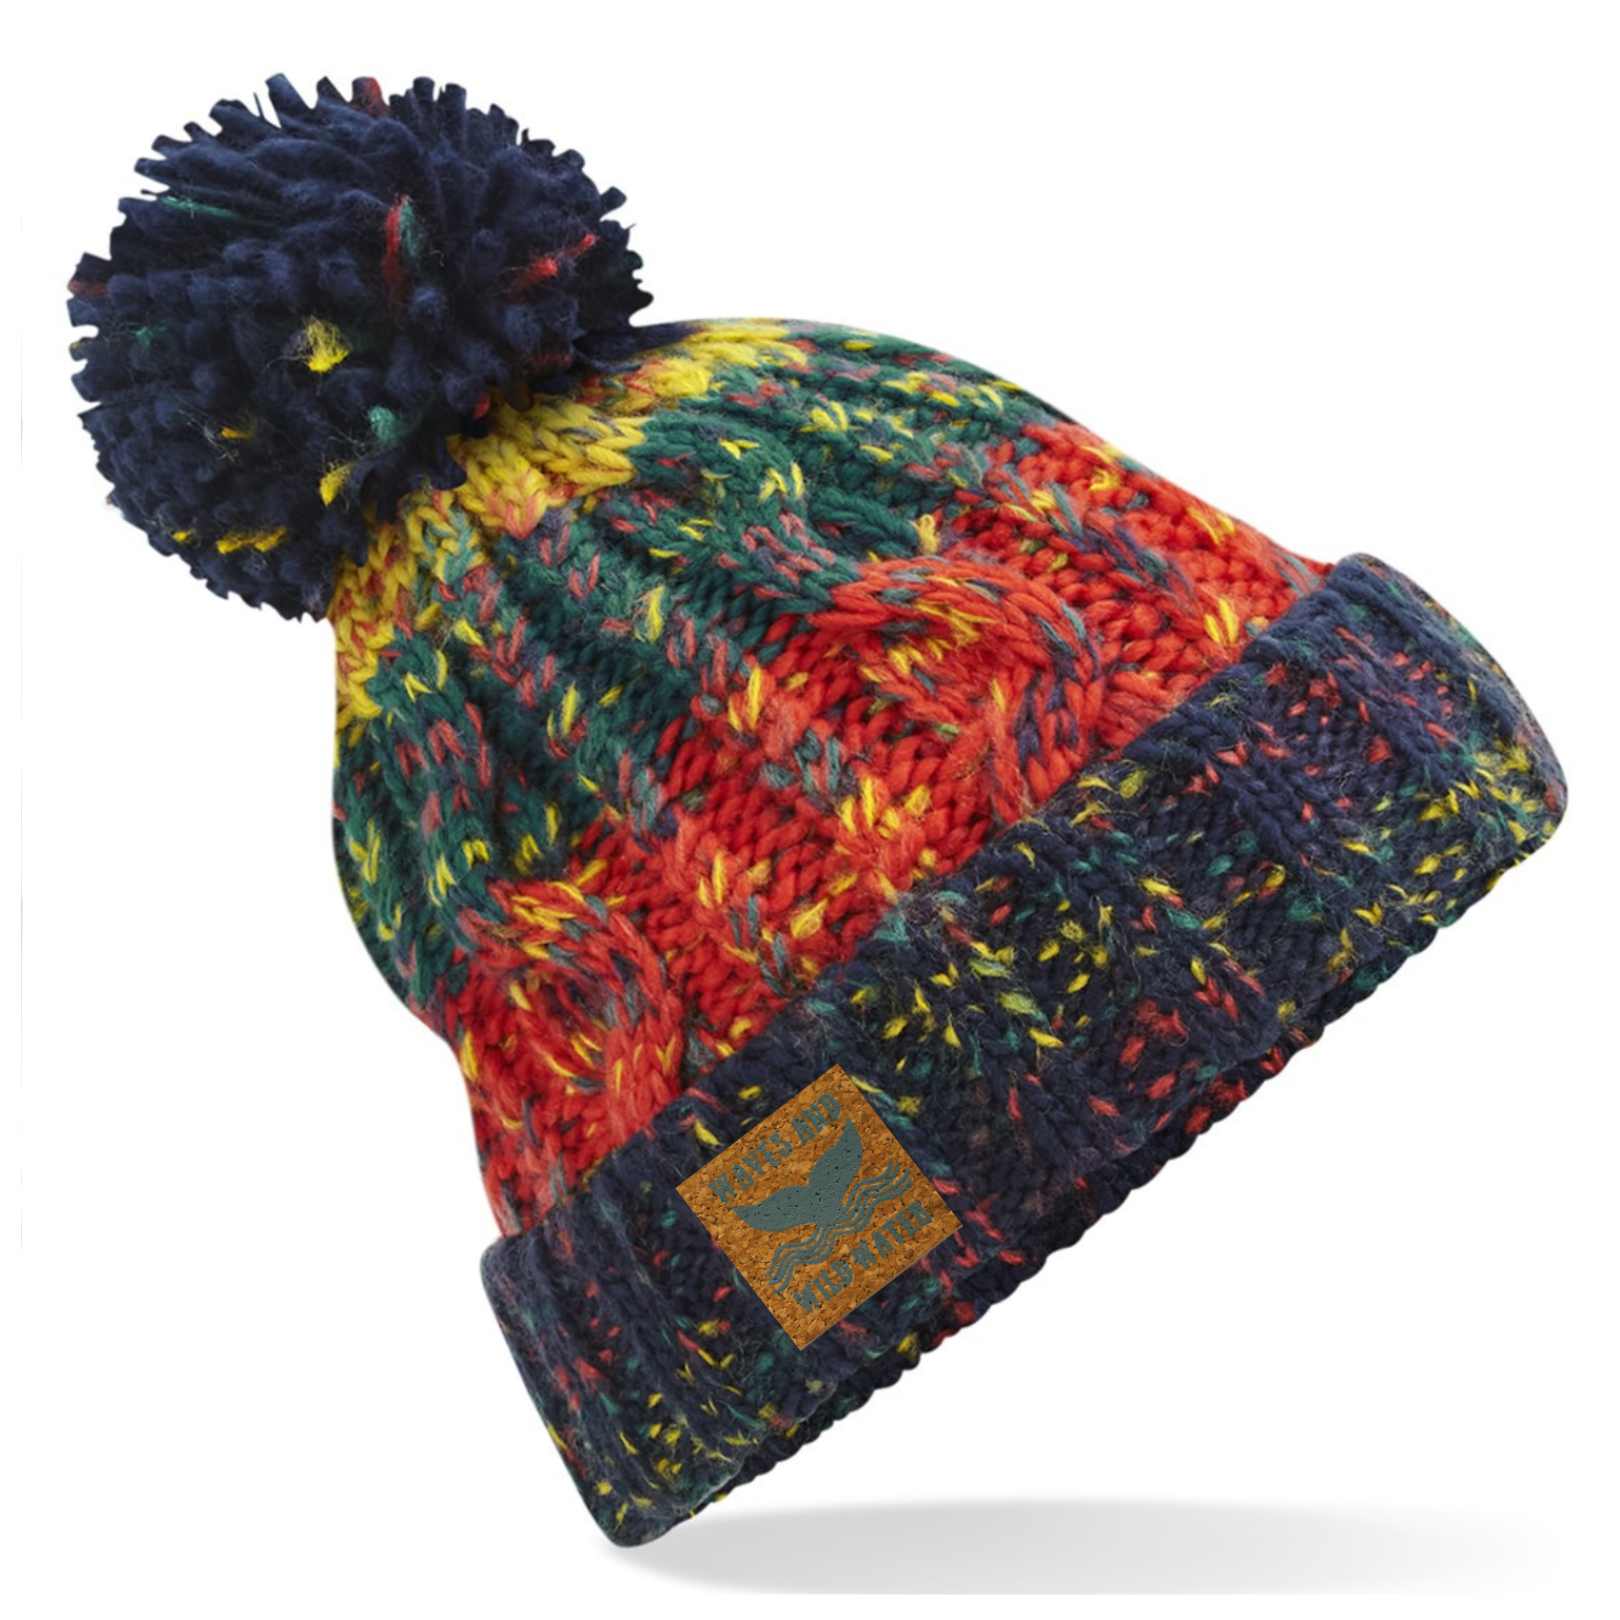 A navy, orange and green knitted beanie hat with a pom pom.